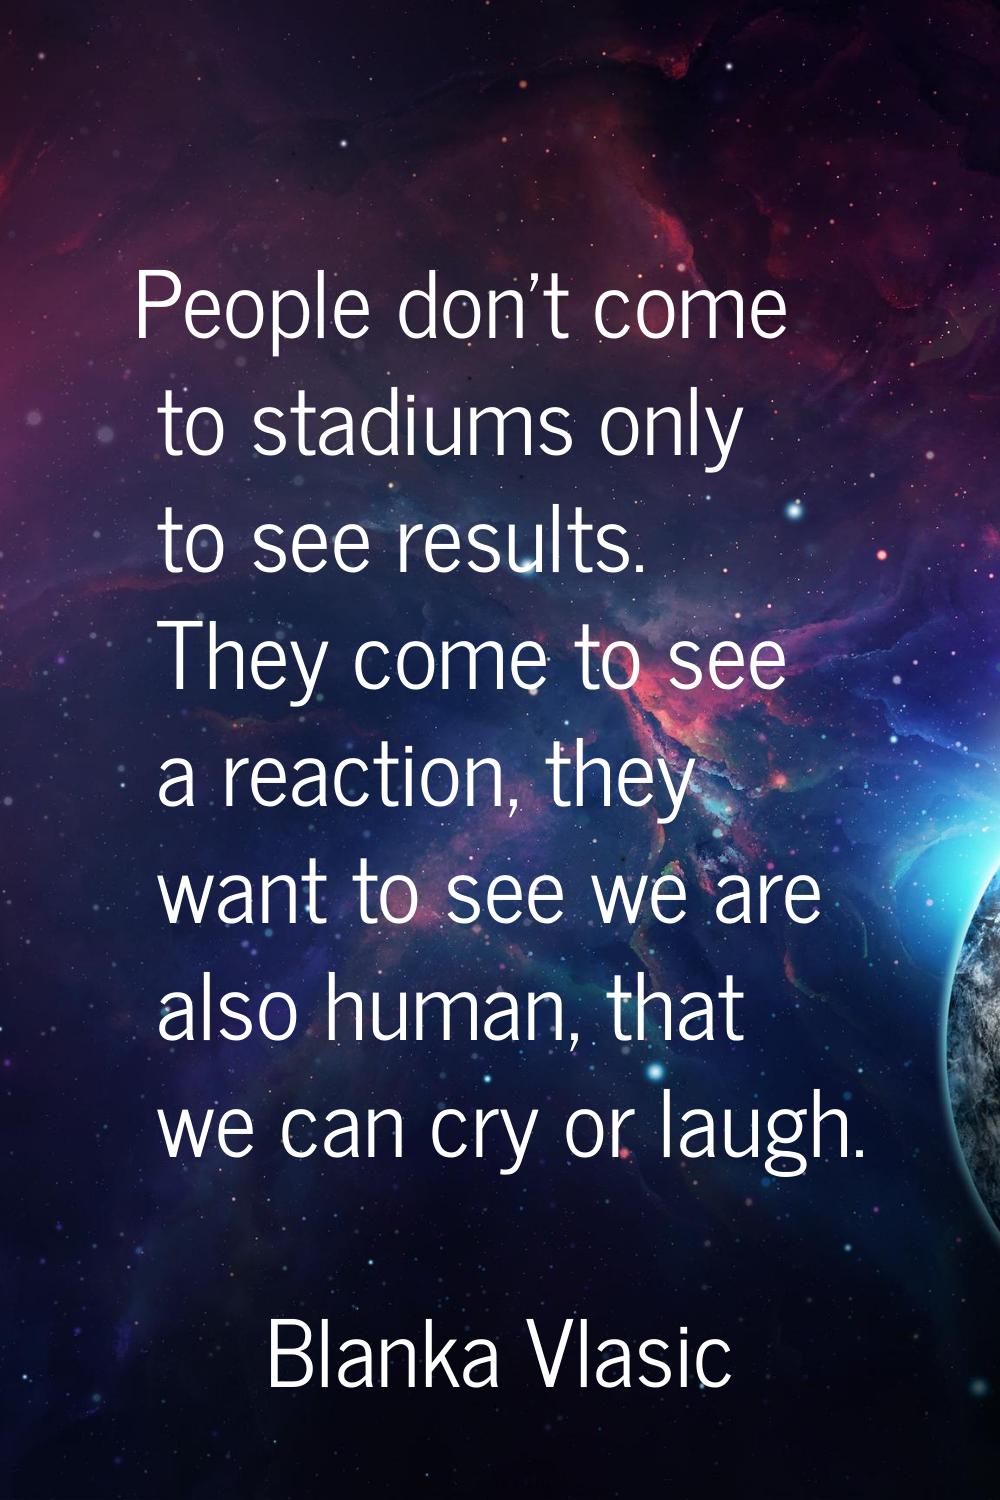 People don't come to stadiums only to see results. They come to see a reaction, they want to see we